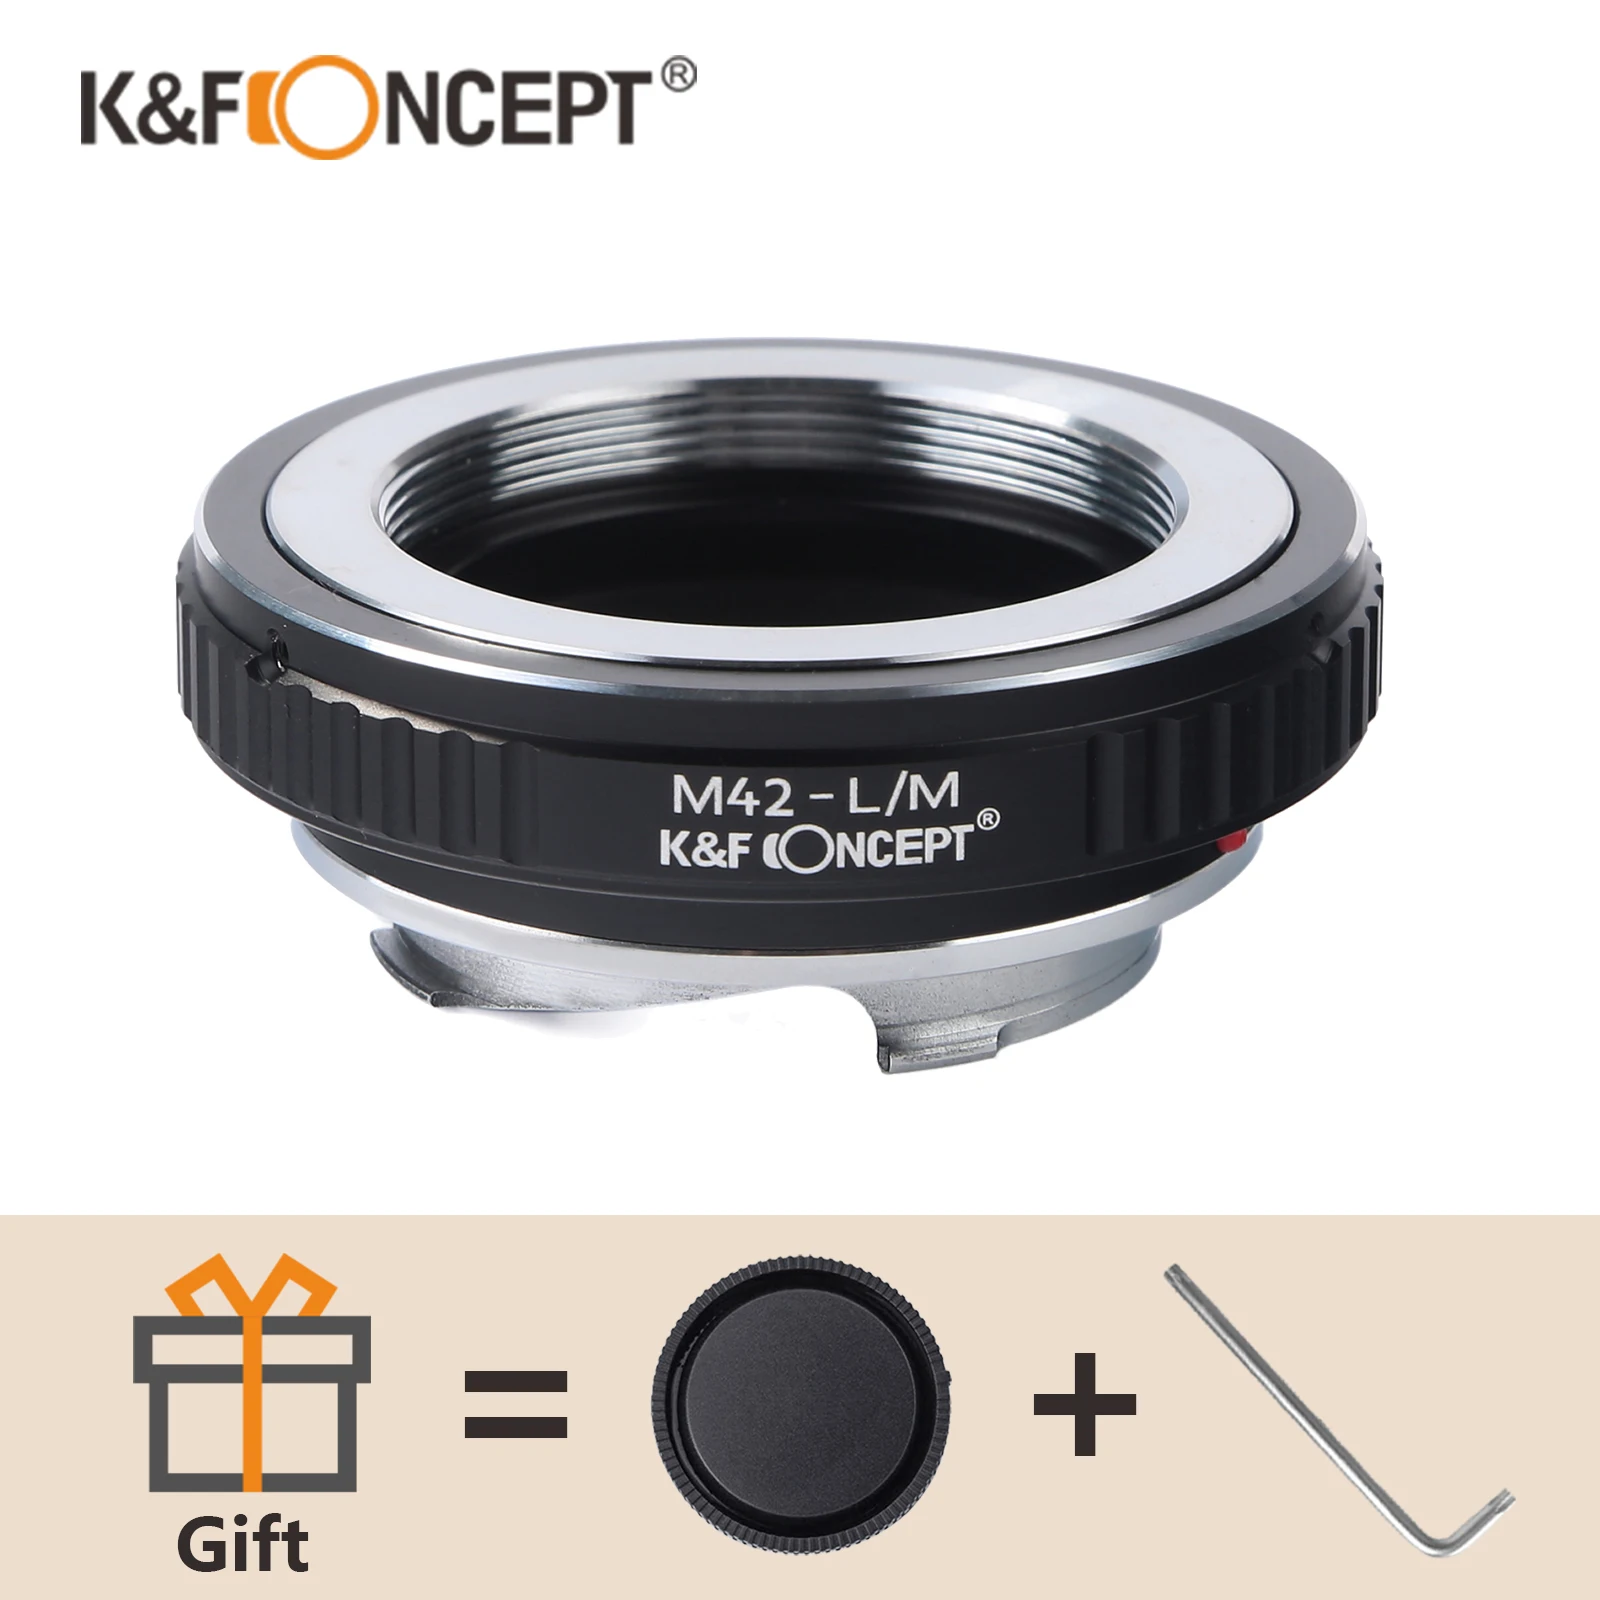 

K&F Concept M42-LM for M42 Mount Lens to Leica M Mount Camera M-P M240 M10 M9 M8 M7 M6 M5 M4 MP MD CL typ240 Lens Adapter